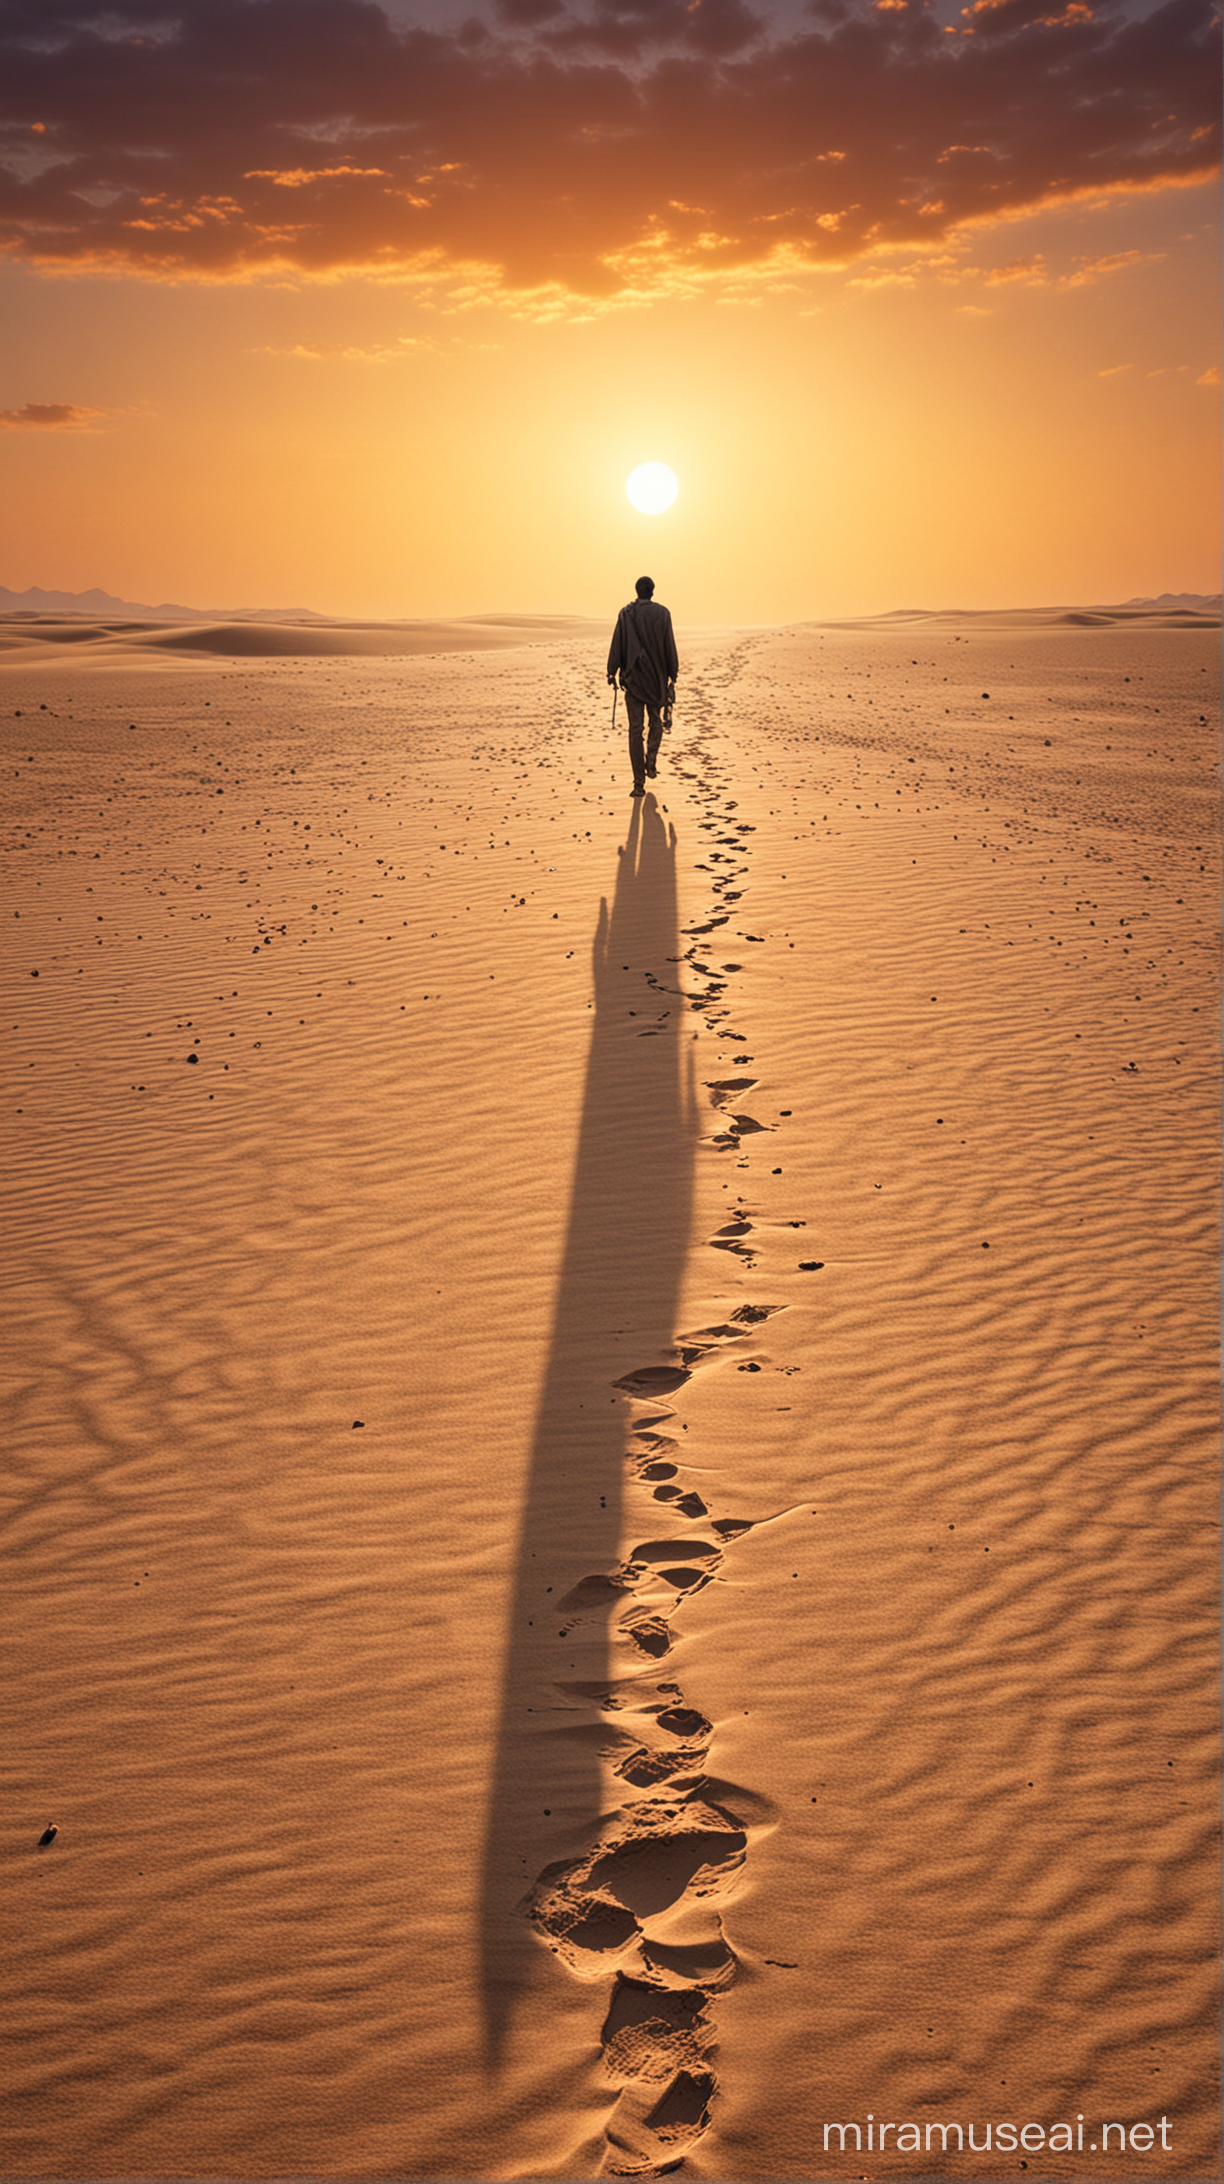  A poor man walked a long way at sunset in a vast desert 